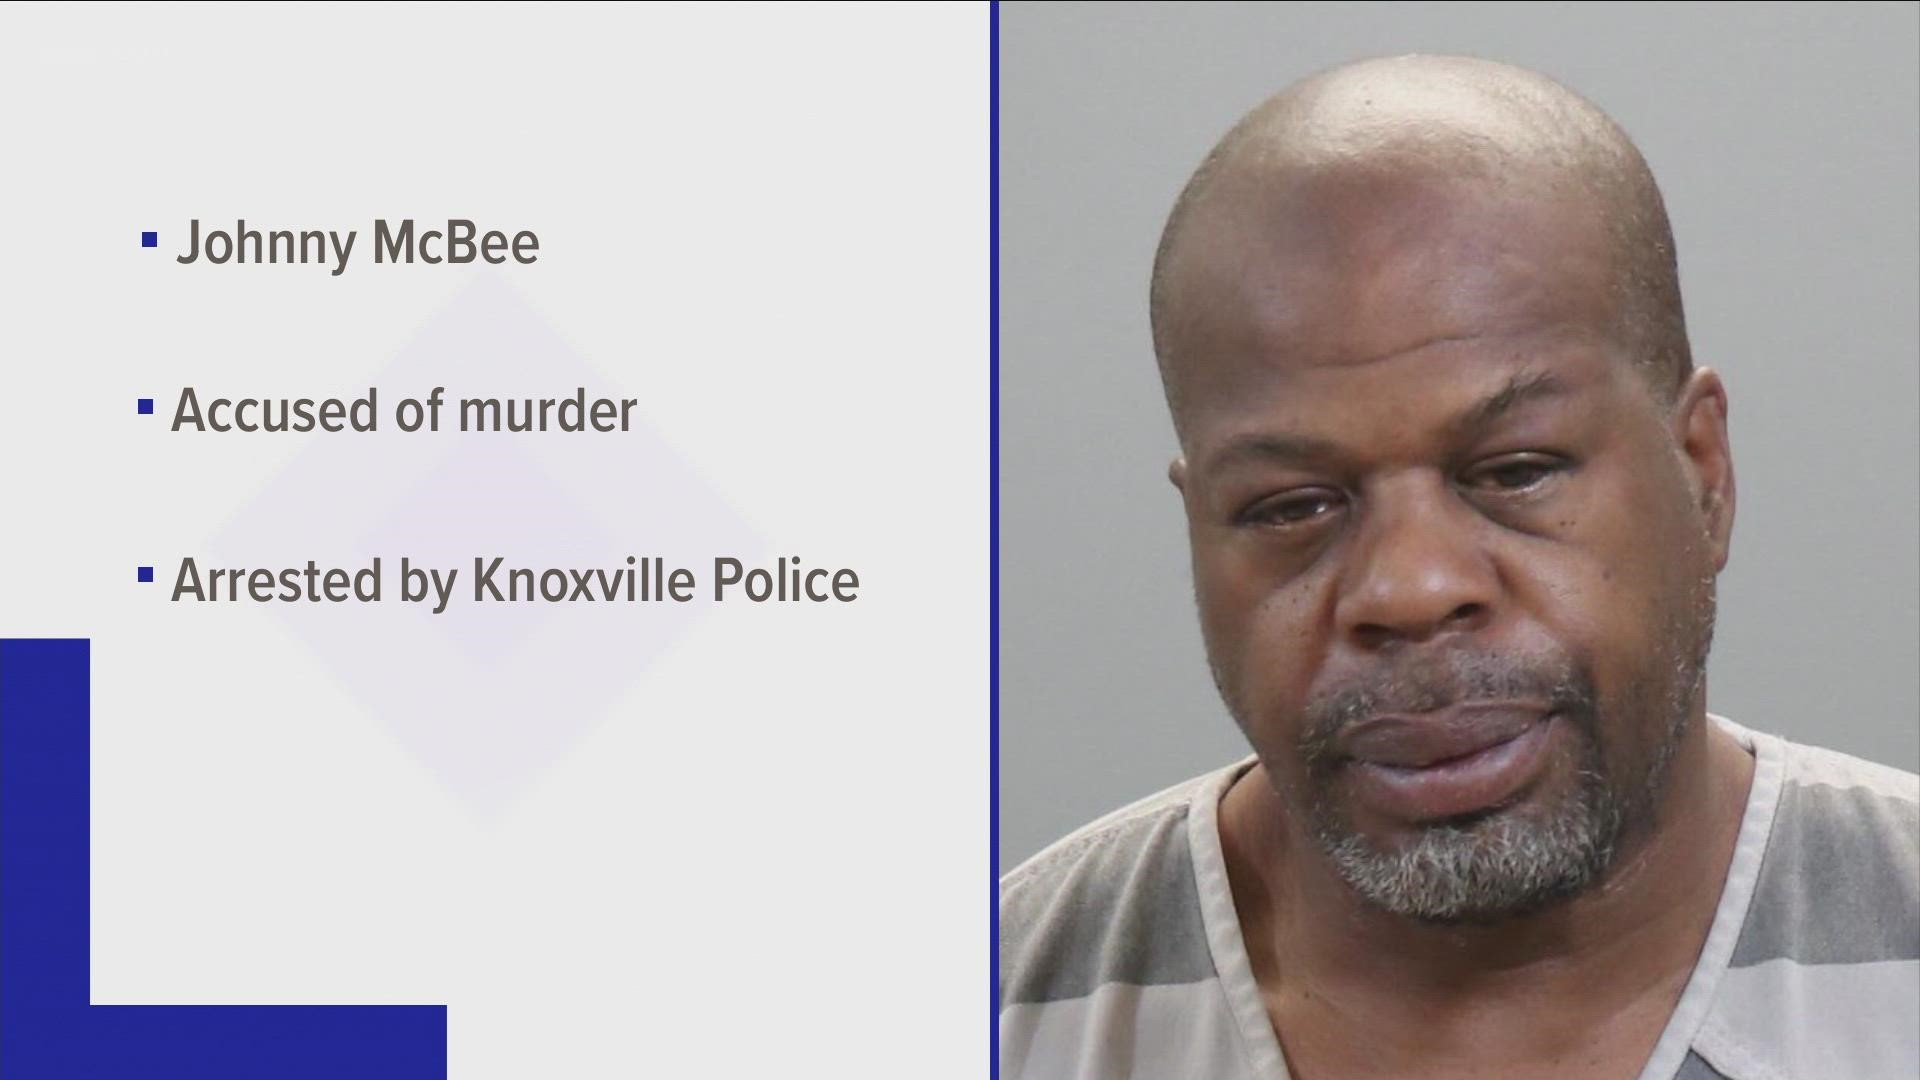 Police have identified Johnny McBee, 59, of Knoxville as the shooting suspect.